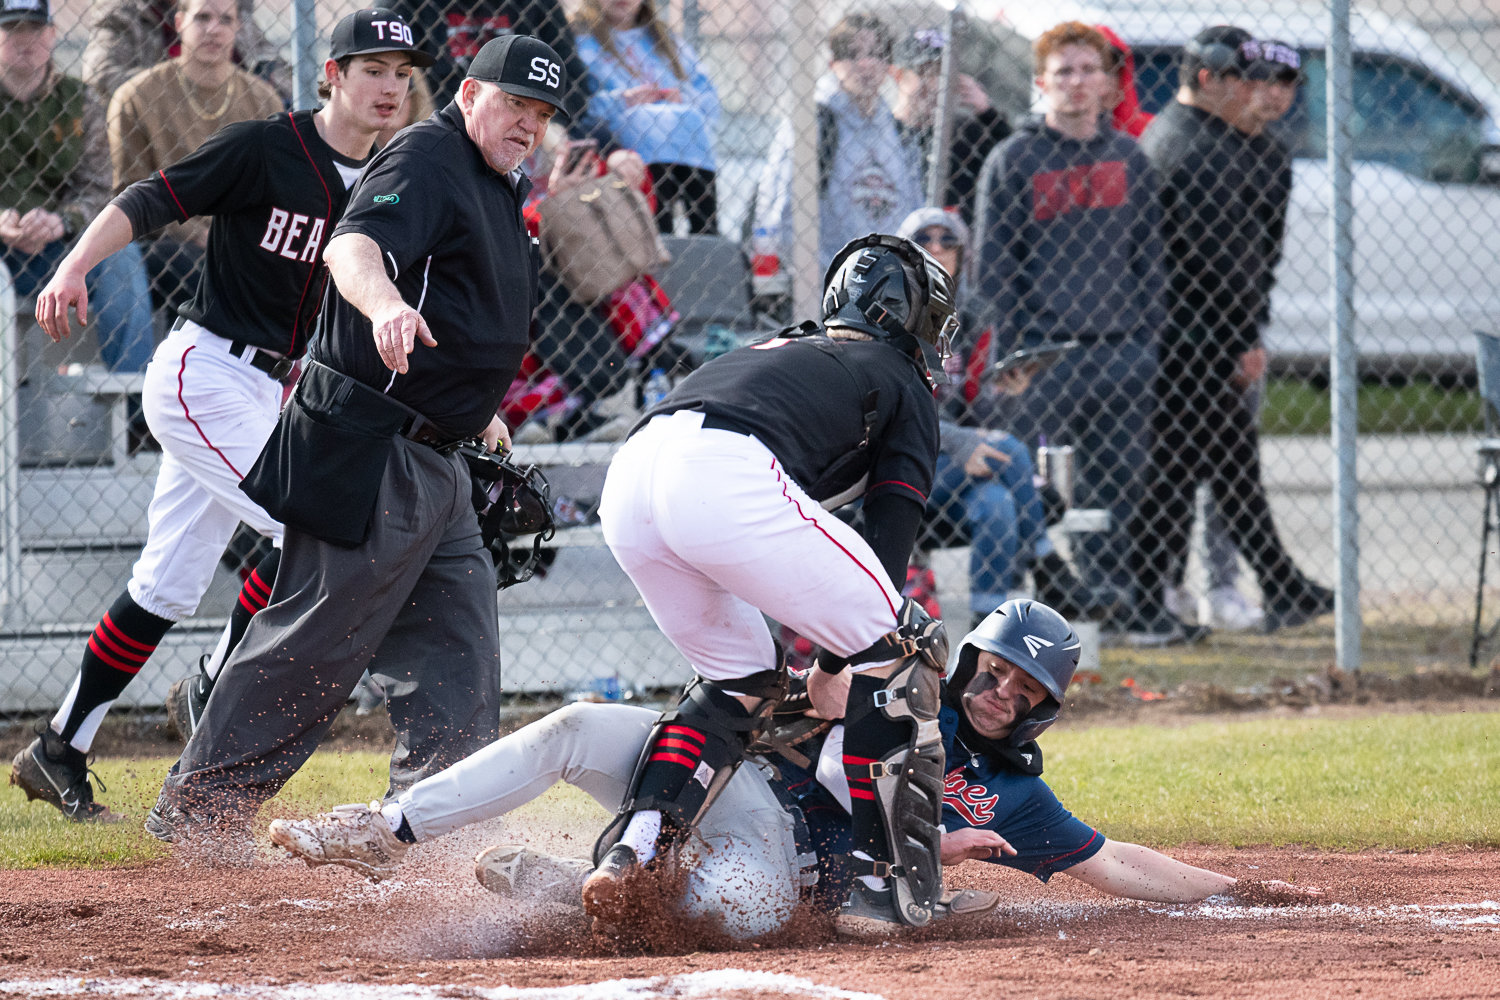 Tenino catcher Austin Gonia gets a tag down on Black Hills' Alec Lynch during the Beavers' 7-4 win over the Wolves on March 14.